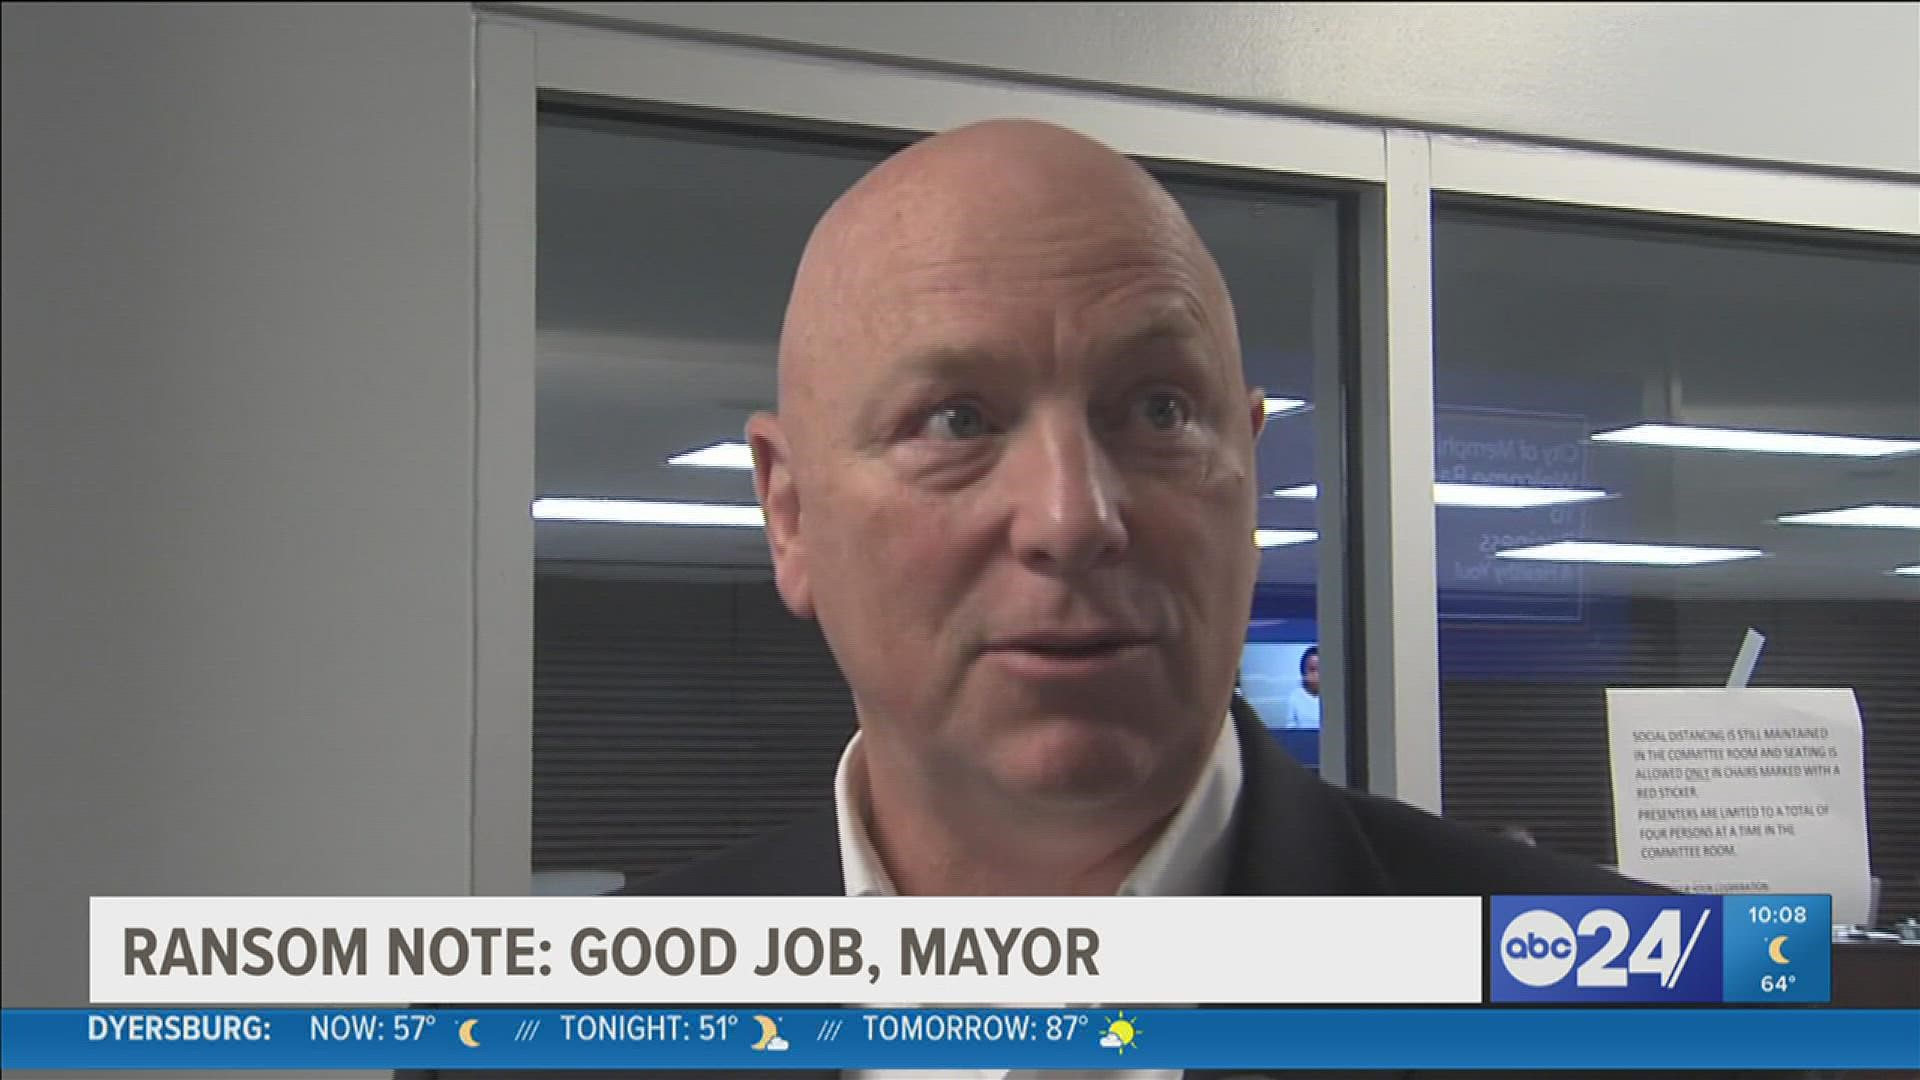 Richard Ransom explains what he thinks about Mayor Jim Strickland's picks for MLGW's next CEO and the city's next COO.